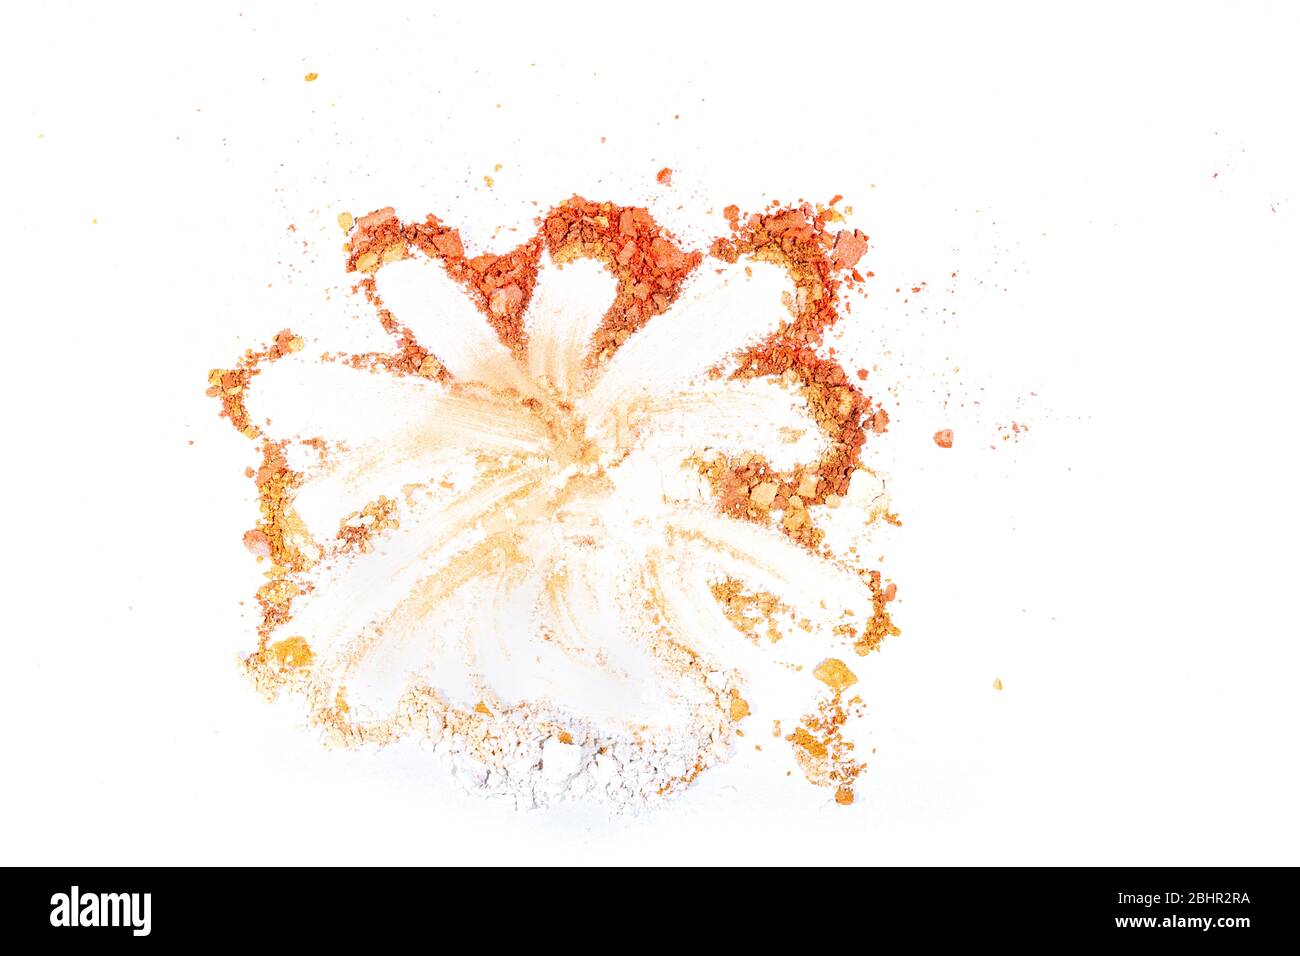 Beige crushed eye shadow isolated on white background.Splatter make up and cosmetic products. Stock Photo